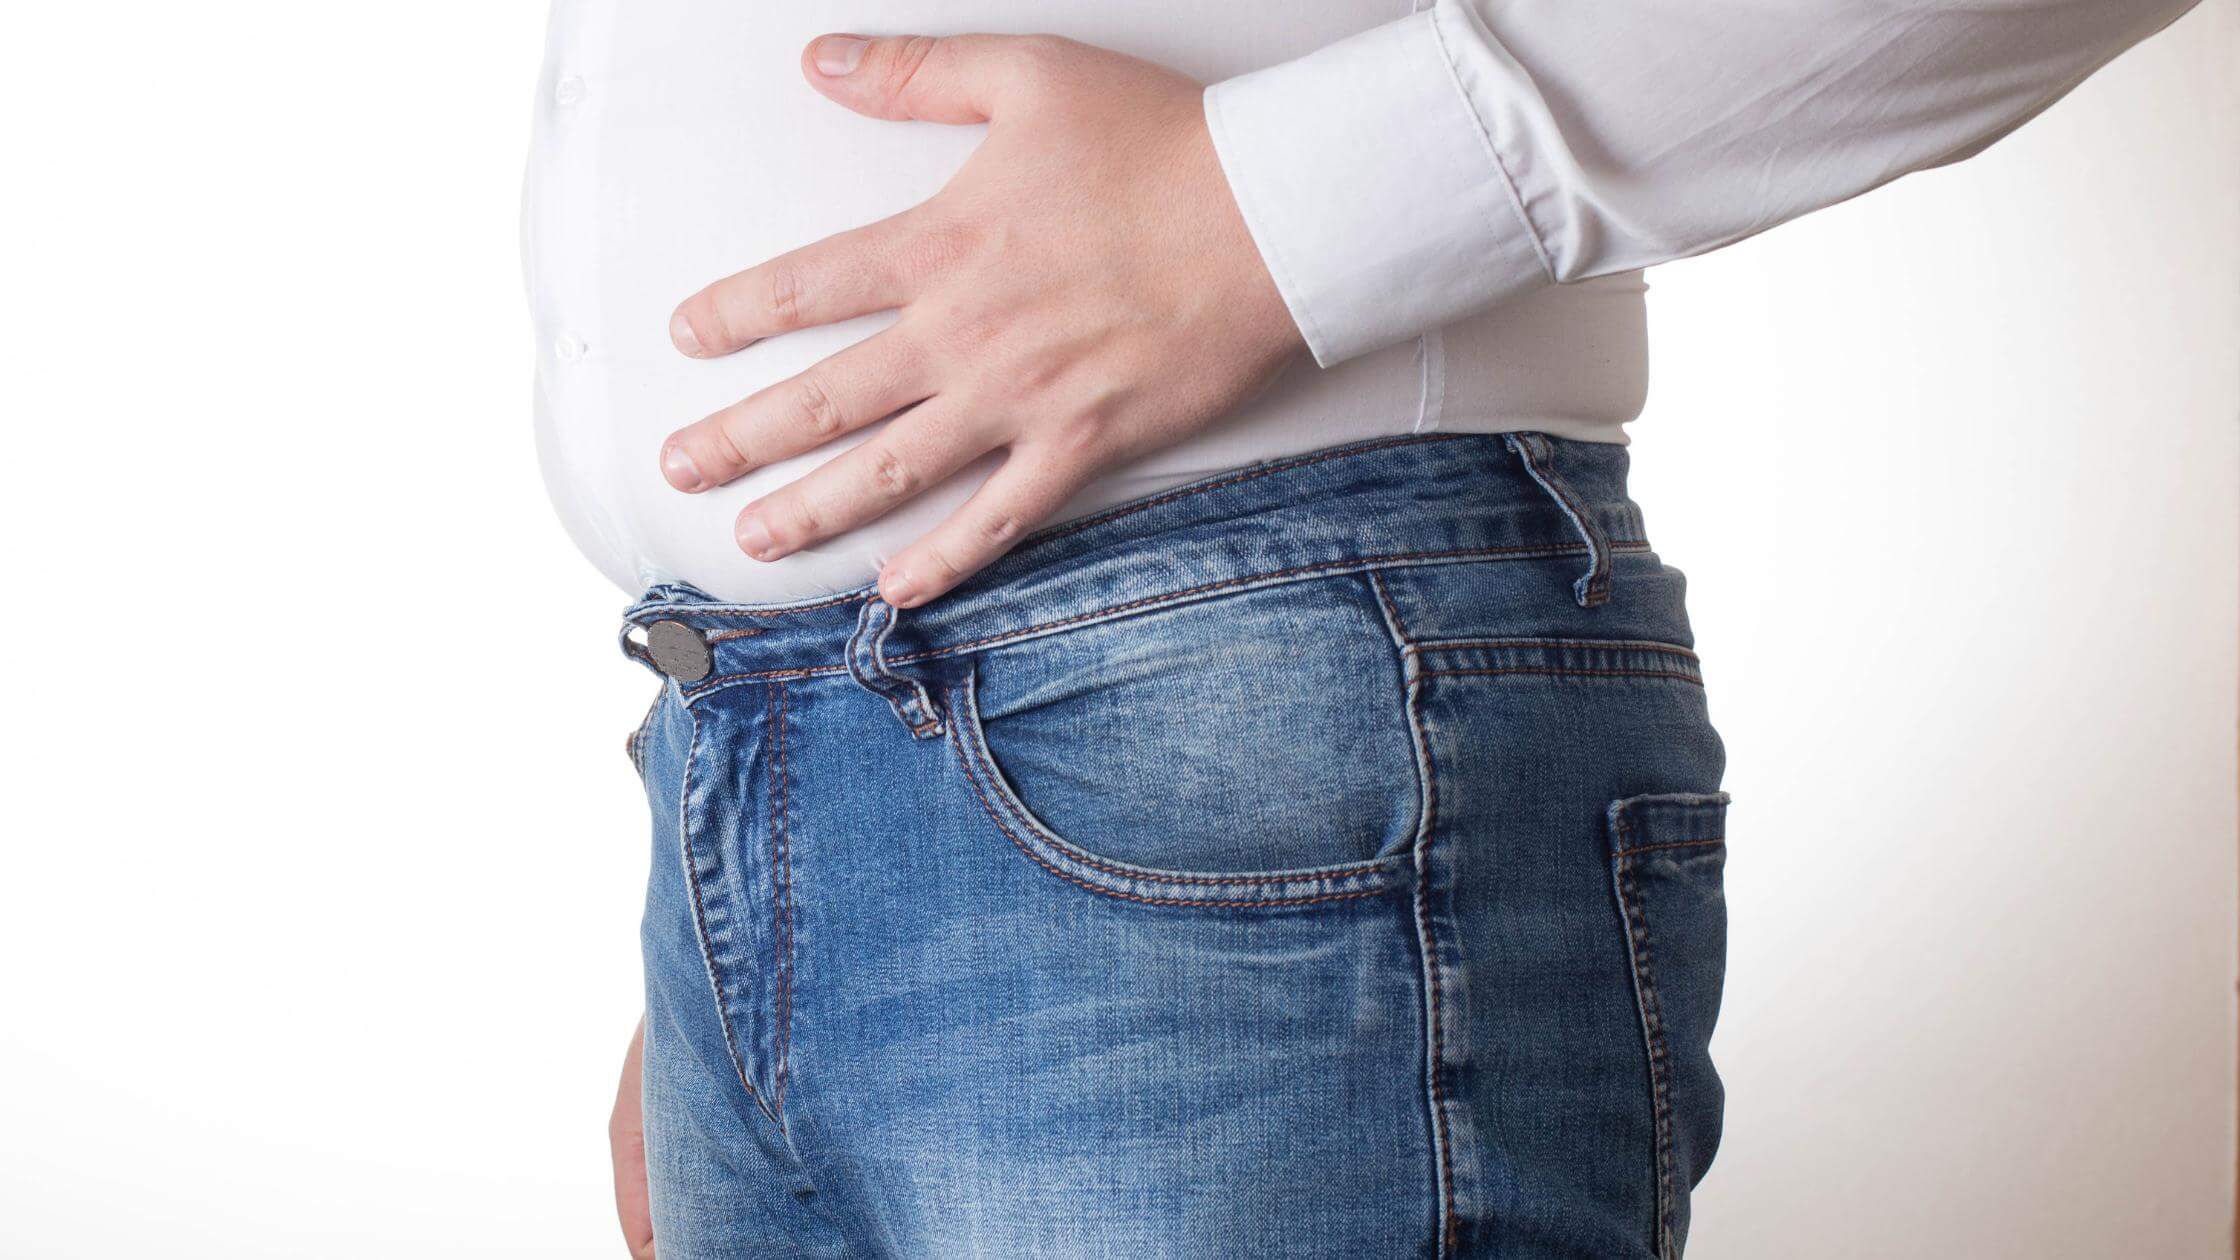 13 Natural Ways To Stop Bloating